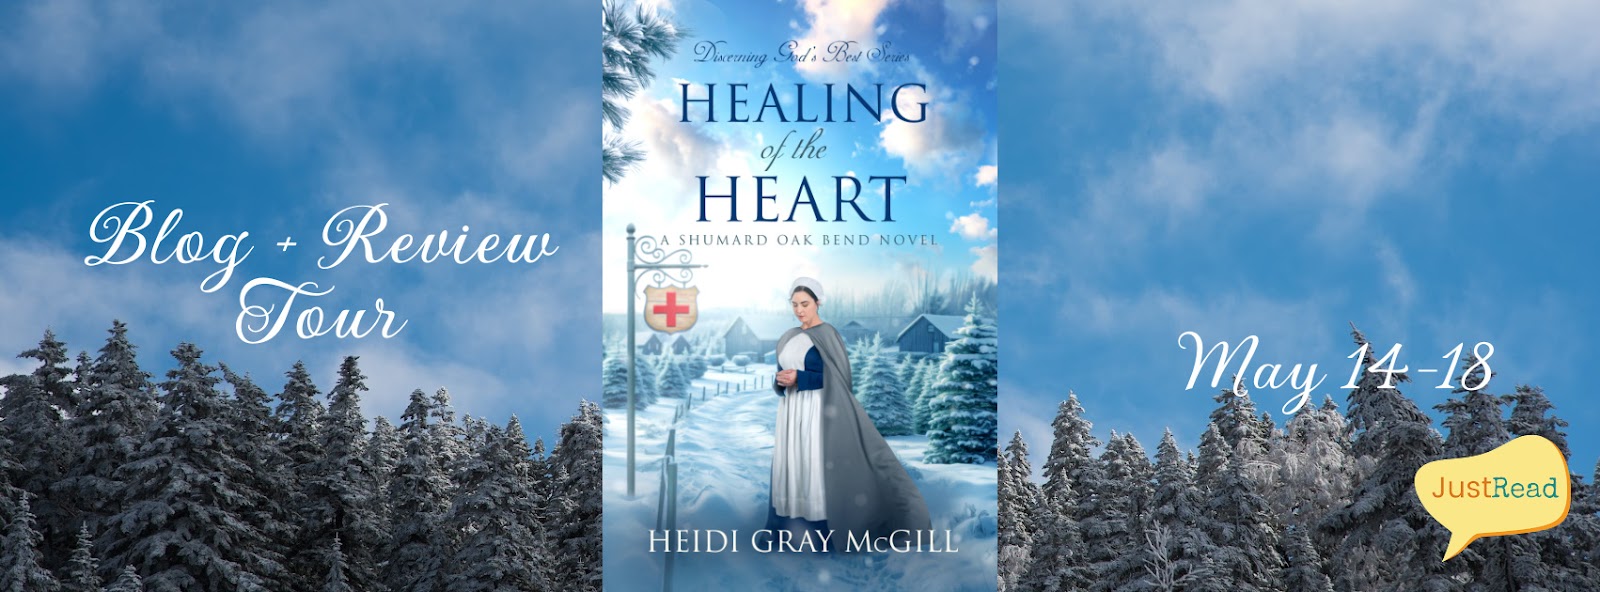 Healing of the Heart JustRead Blog + Review Tour